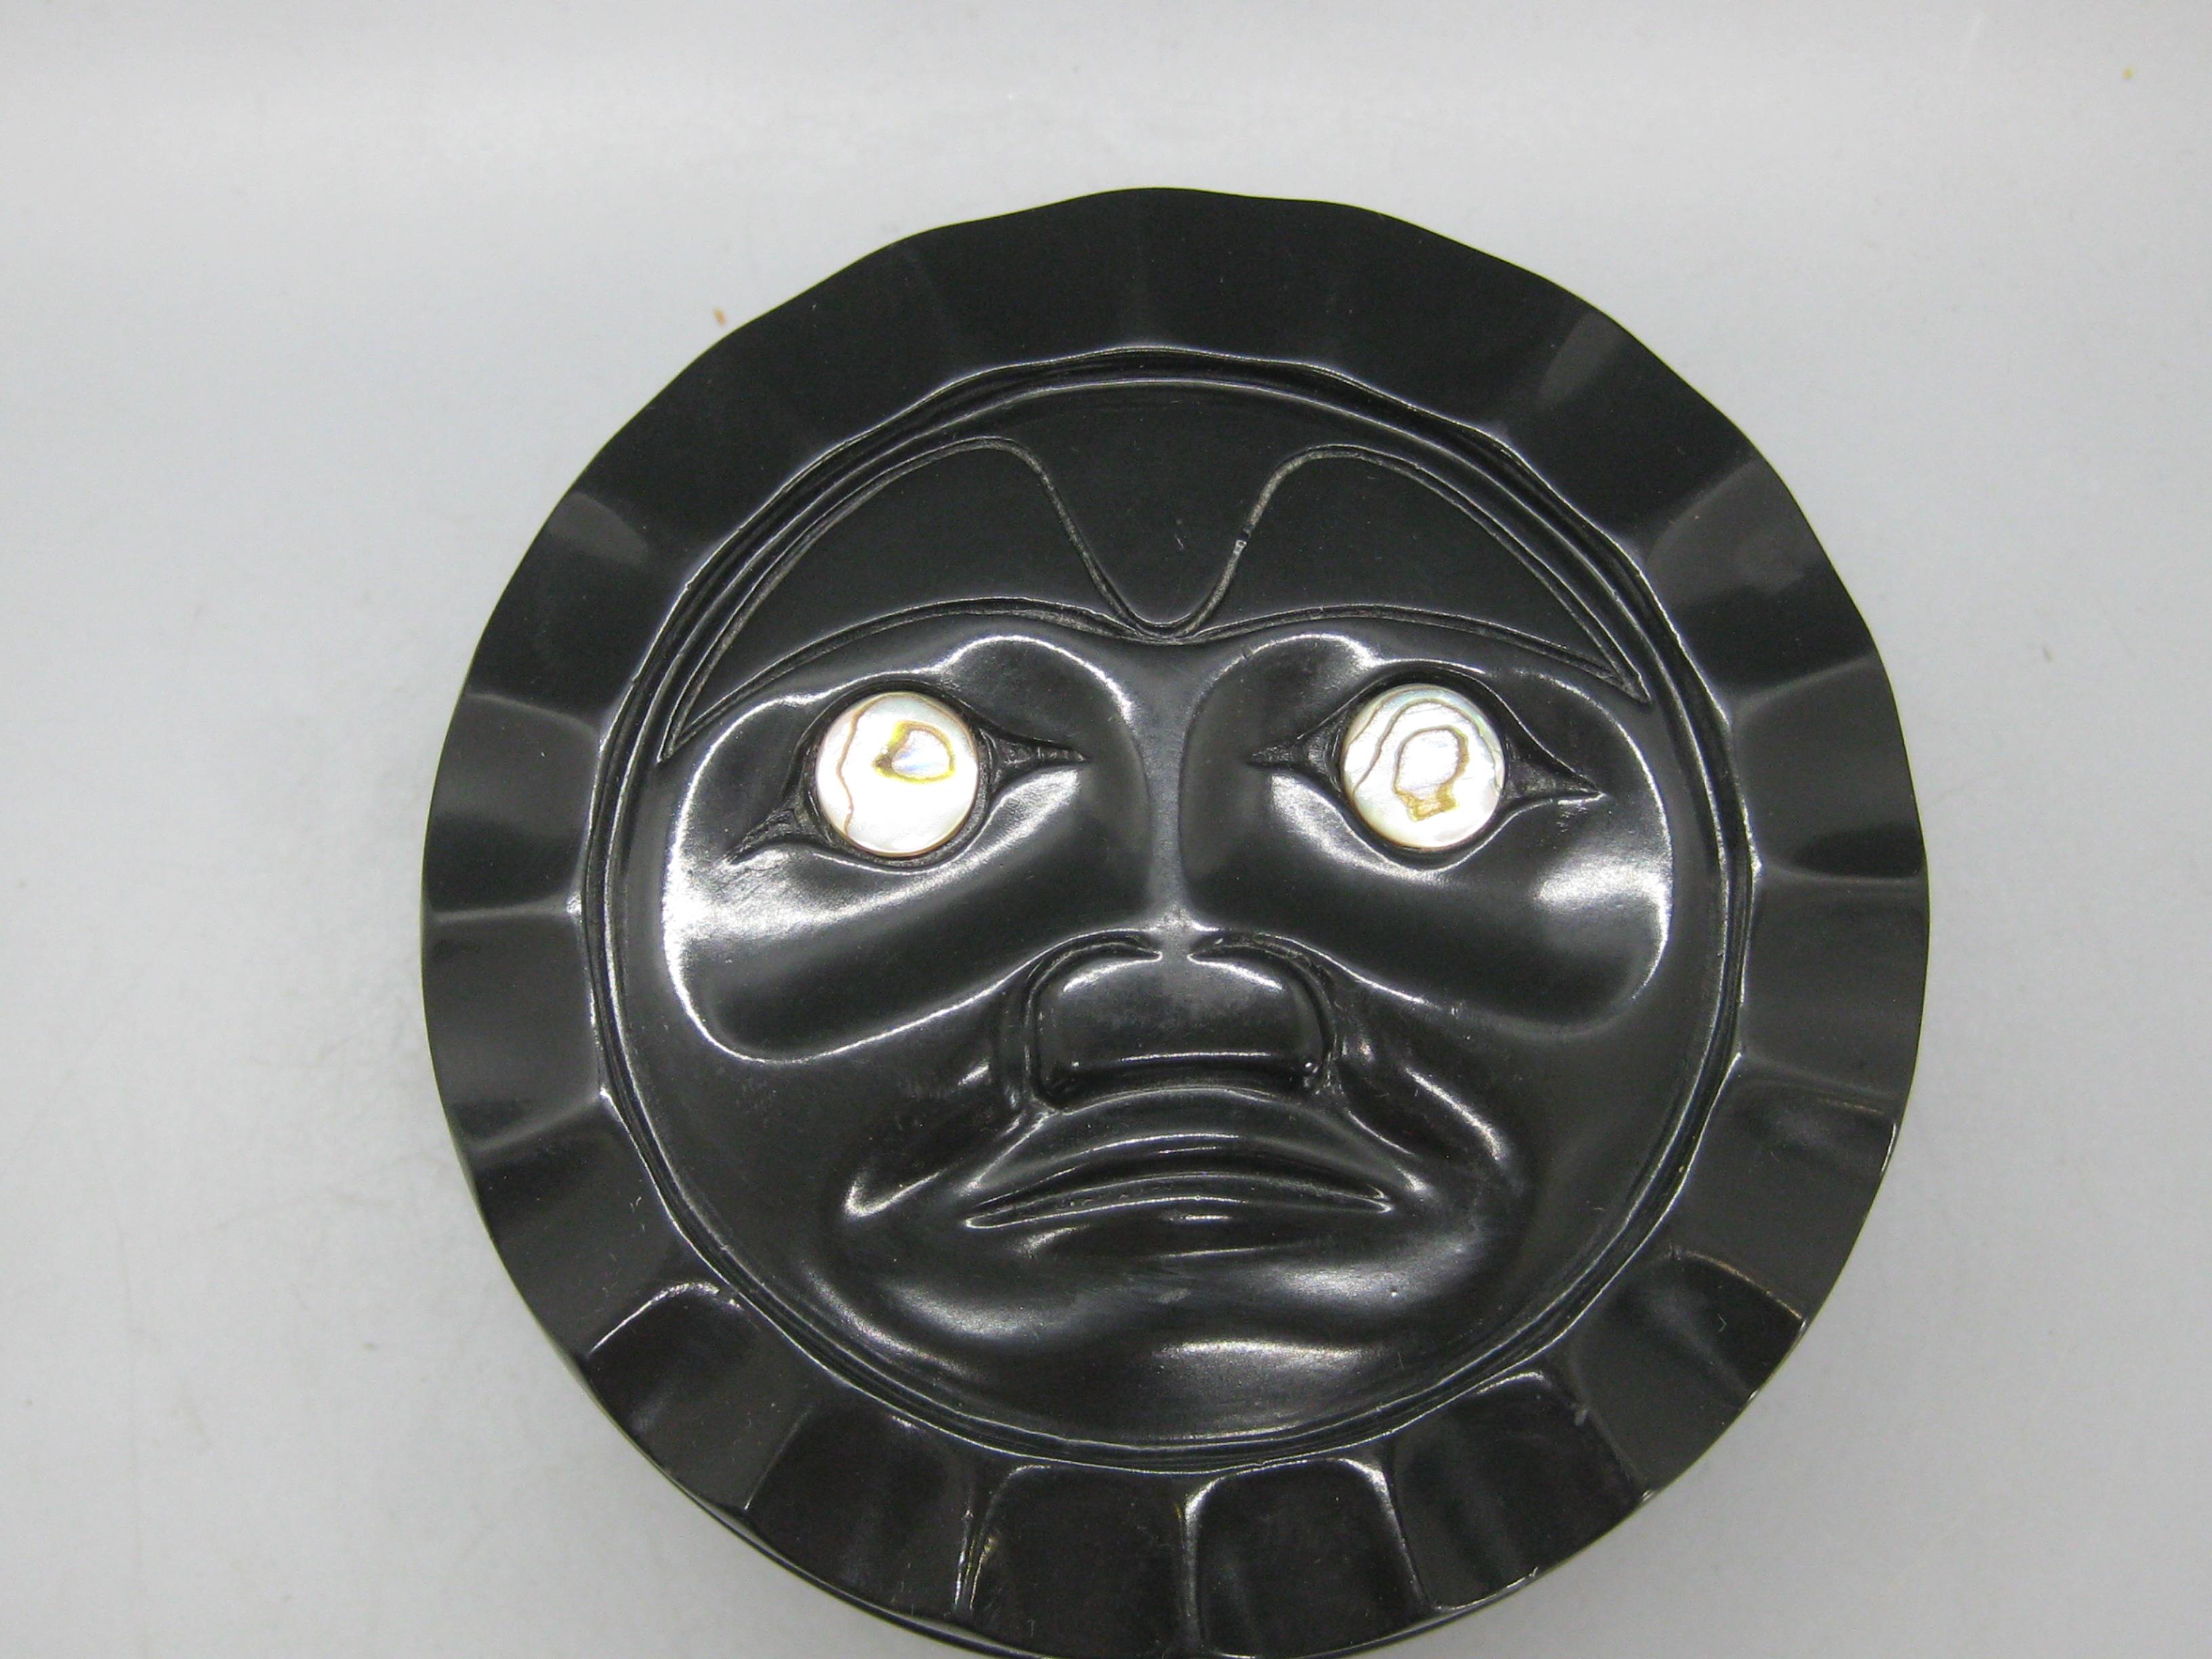 Wonderful vintage Inuit Pacific Northwest Native American Indian/Eskimo Haida Sun lidded trinket stash box. Has inlaid abalone shell in the eyes. Made of black resin and dates from the 1960's. Great form and design. In excellent original condition.